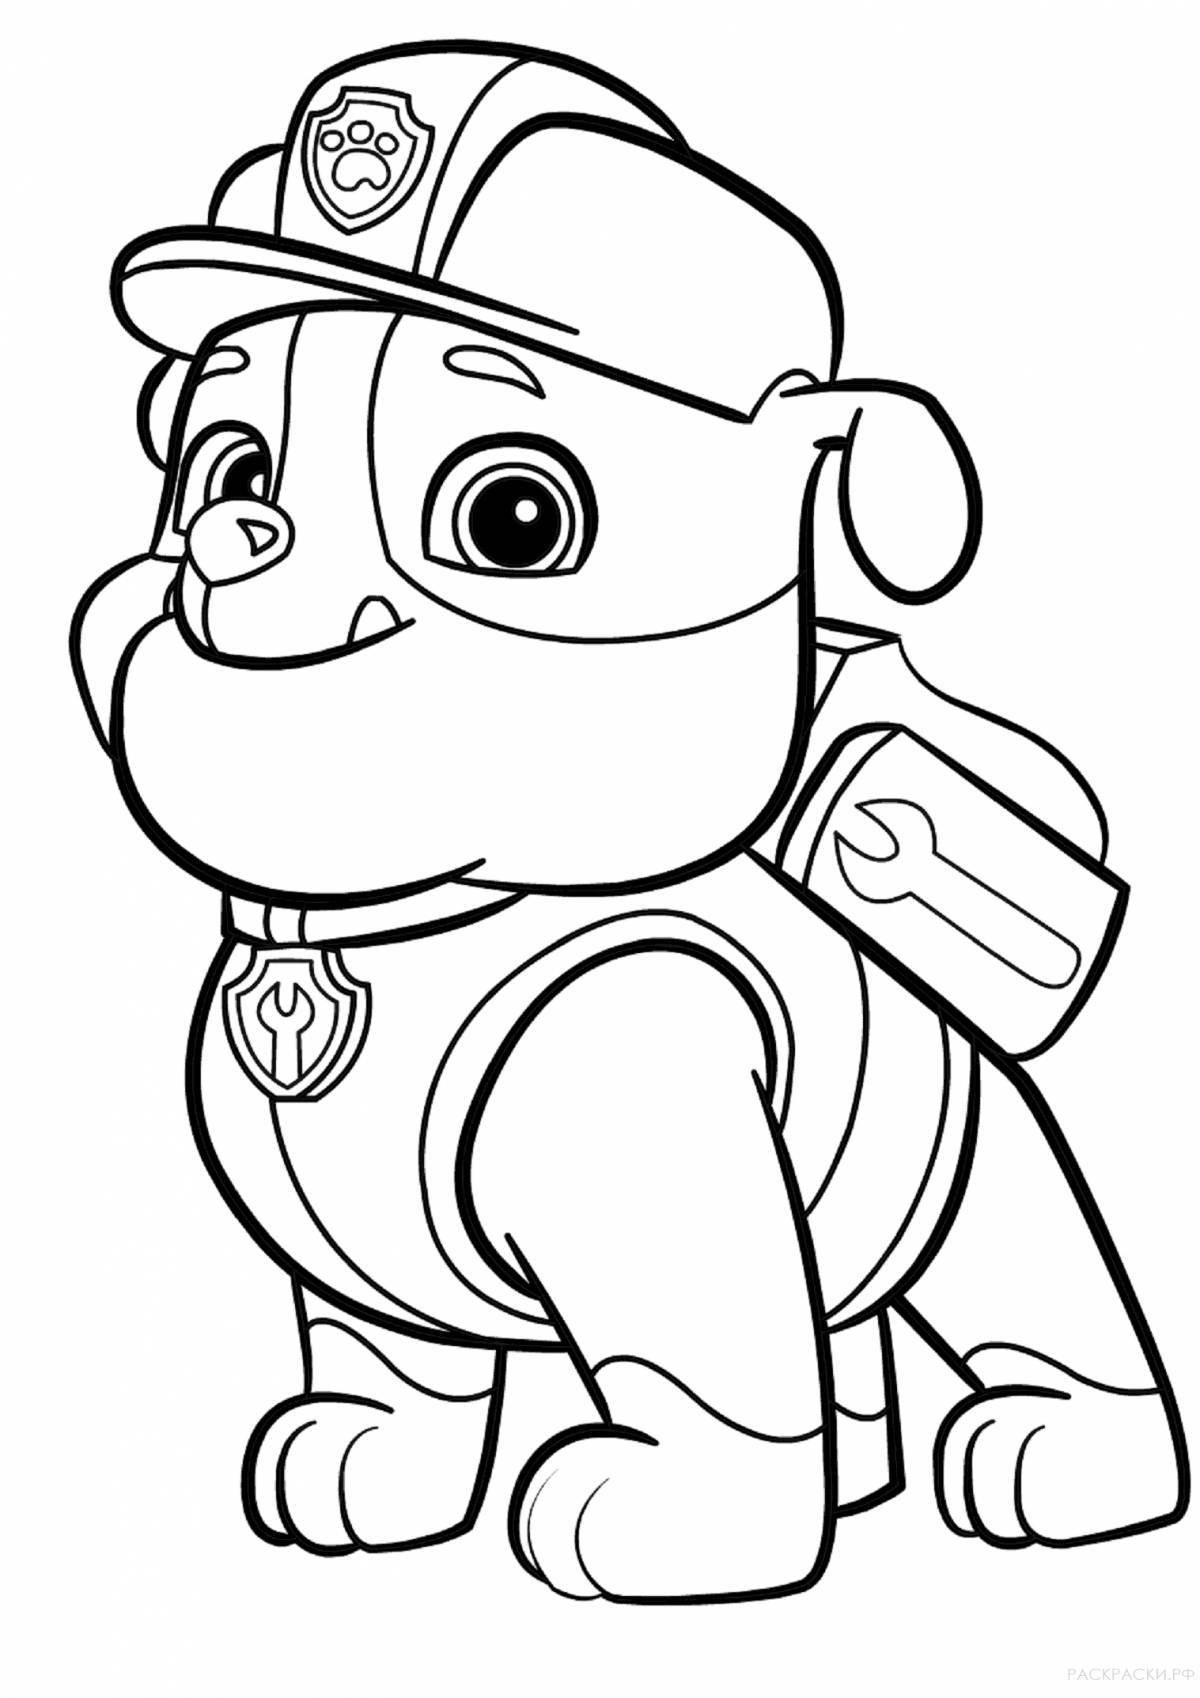 Creative Paw Patrol coloring book for kids 6-7 years old